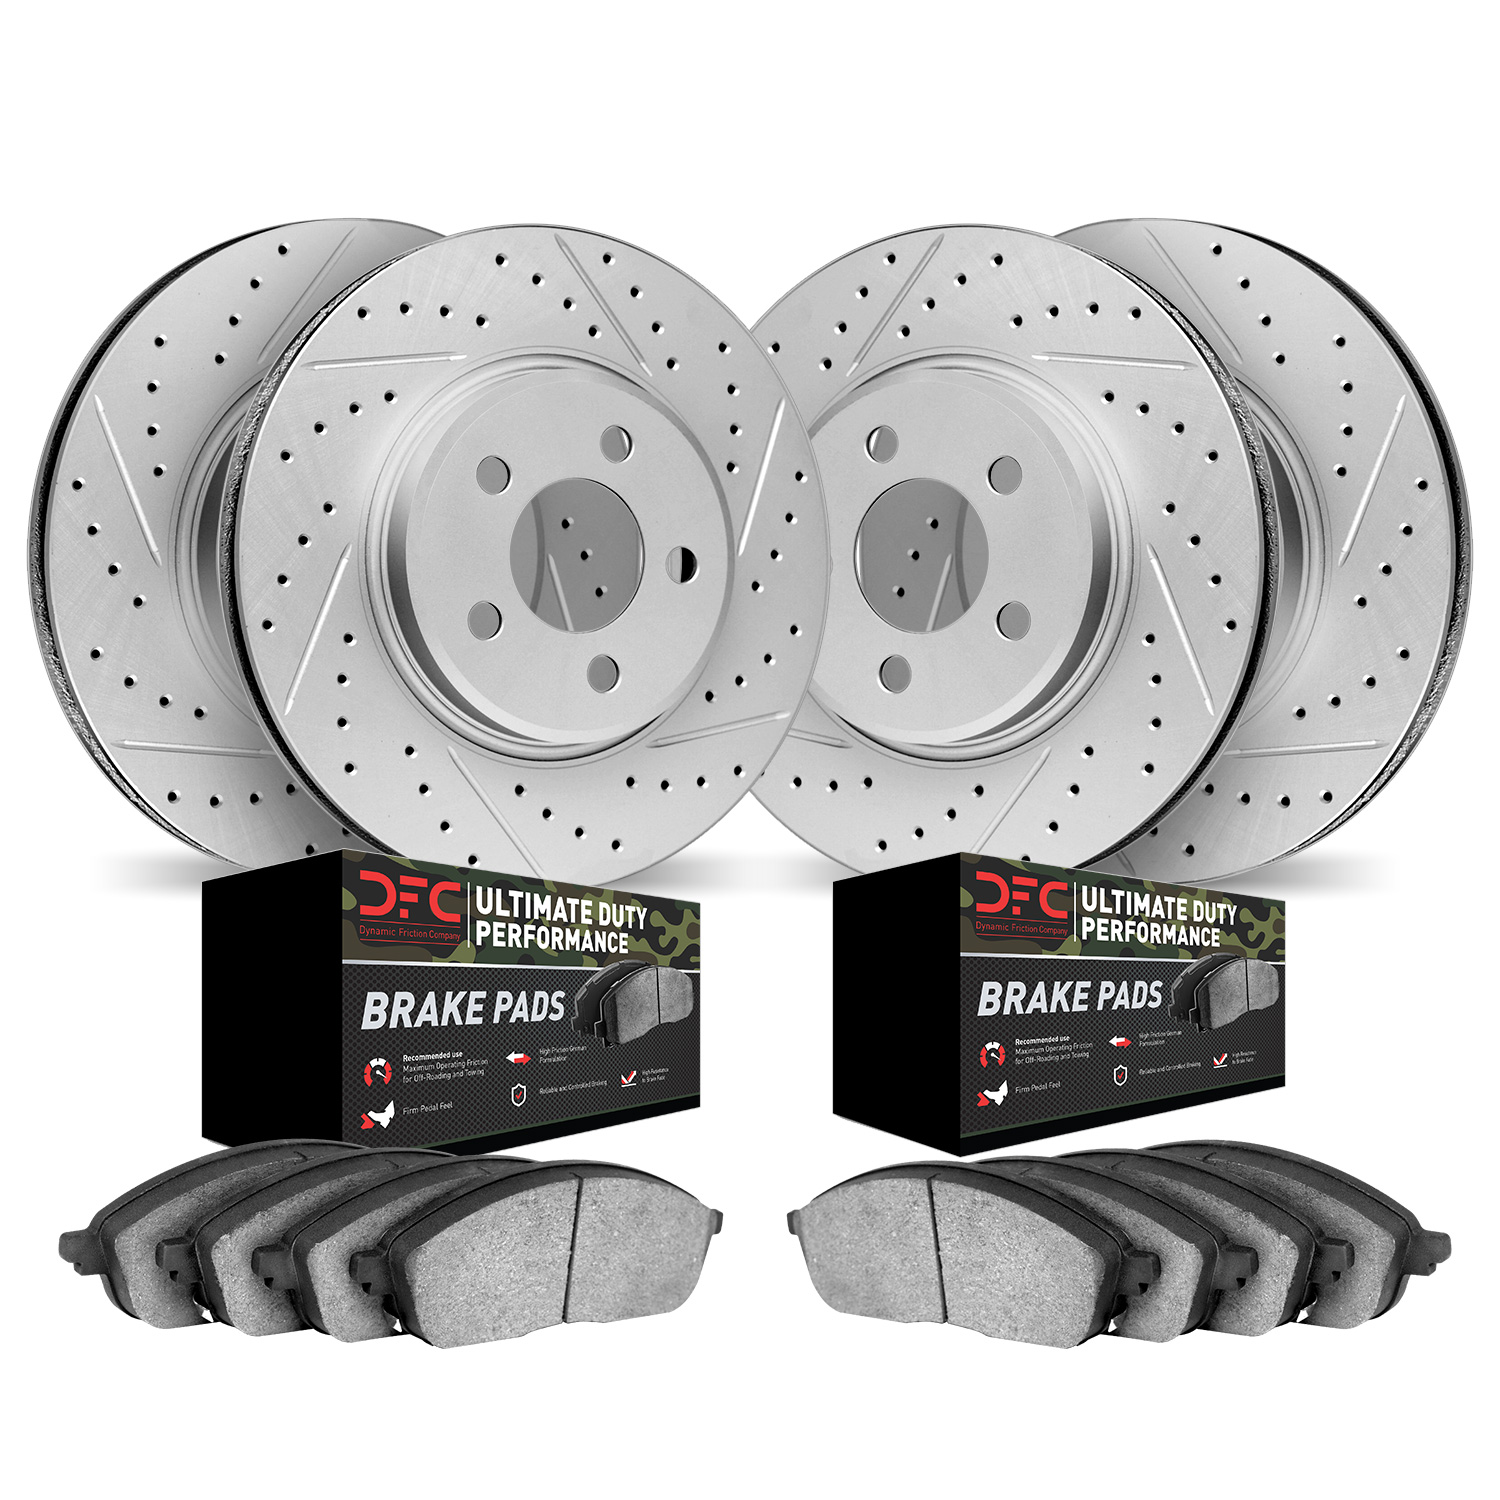 2404-76007 Geoperformance Drilled/Slotted Brake Rotors with Ultimate-Duty Brake Pads Kit, 2008-2021 Lexus/Toyota/Scion, Position